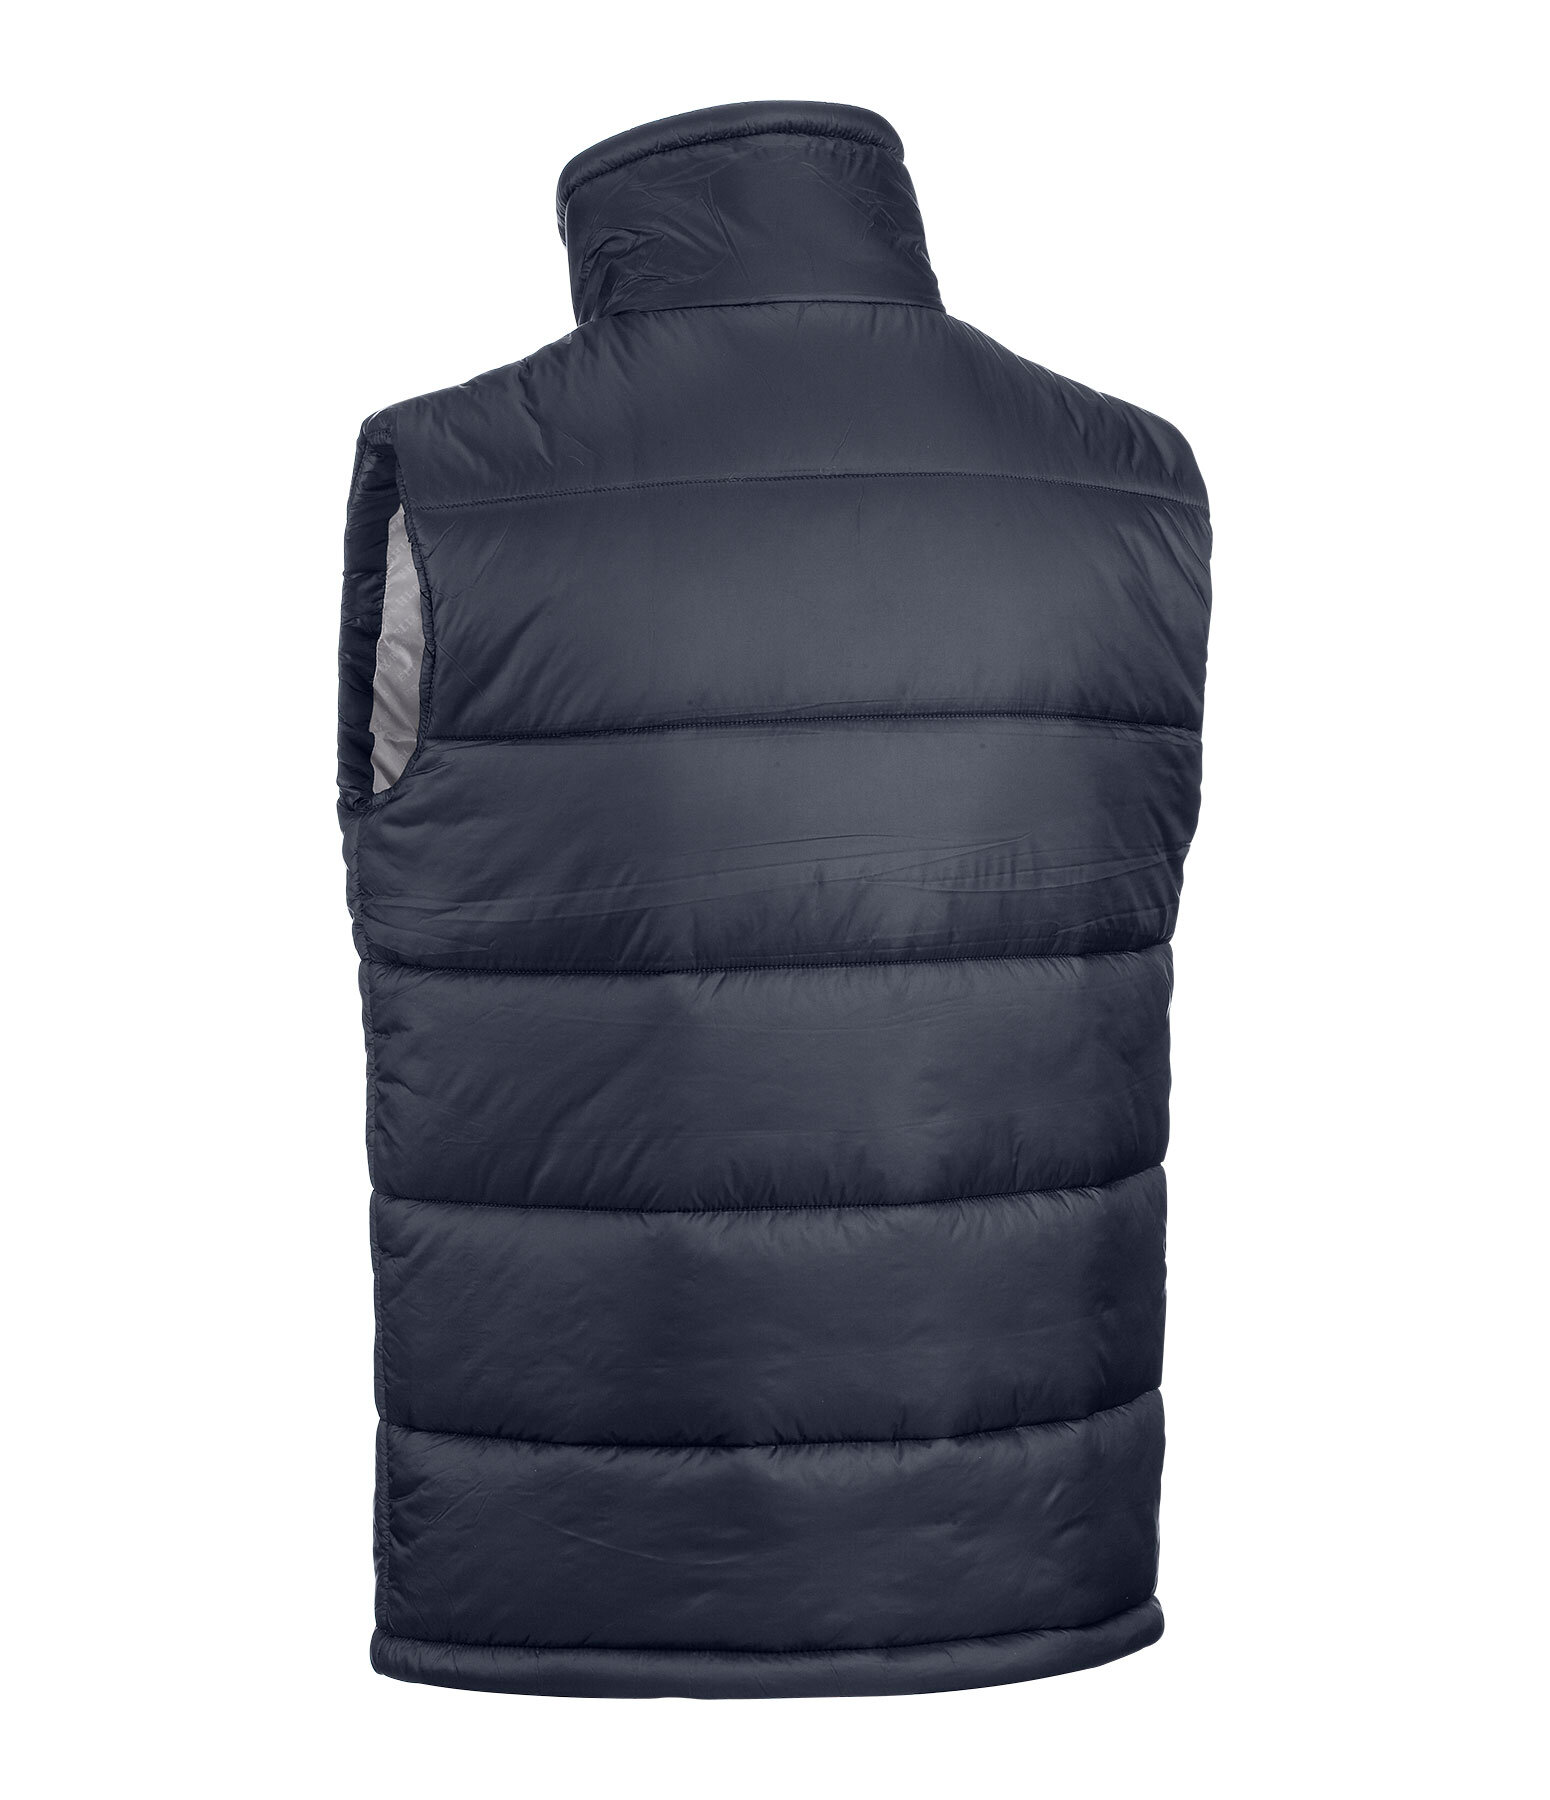 Men's Quilted Gilet San Diego